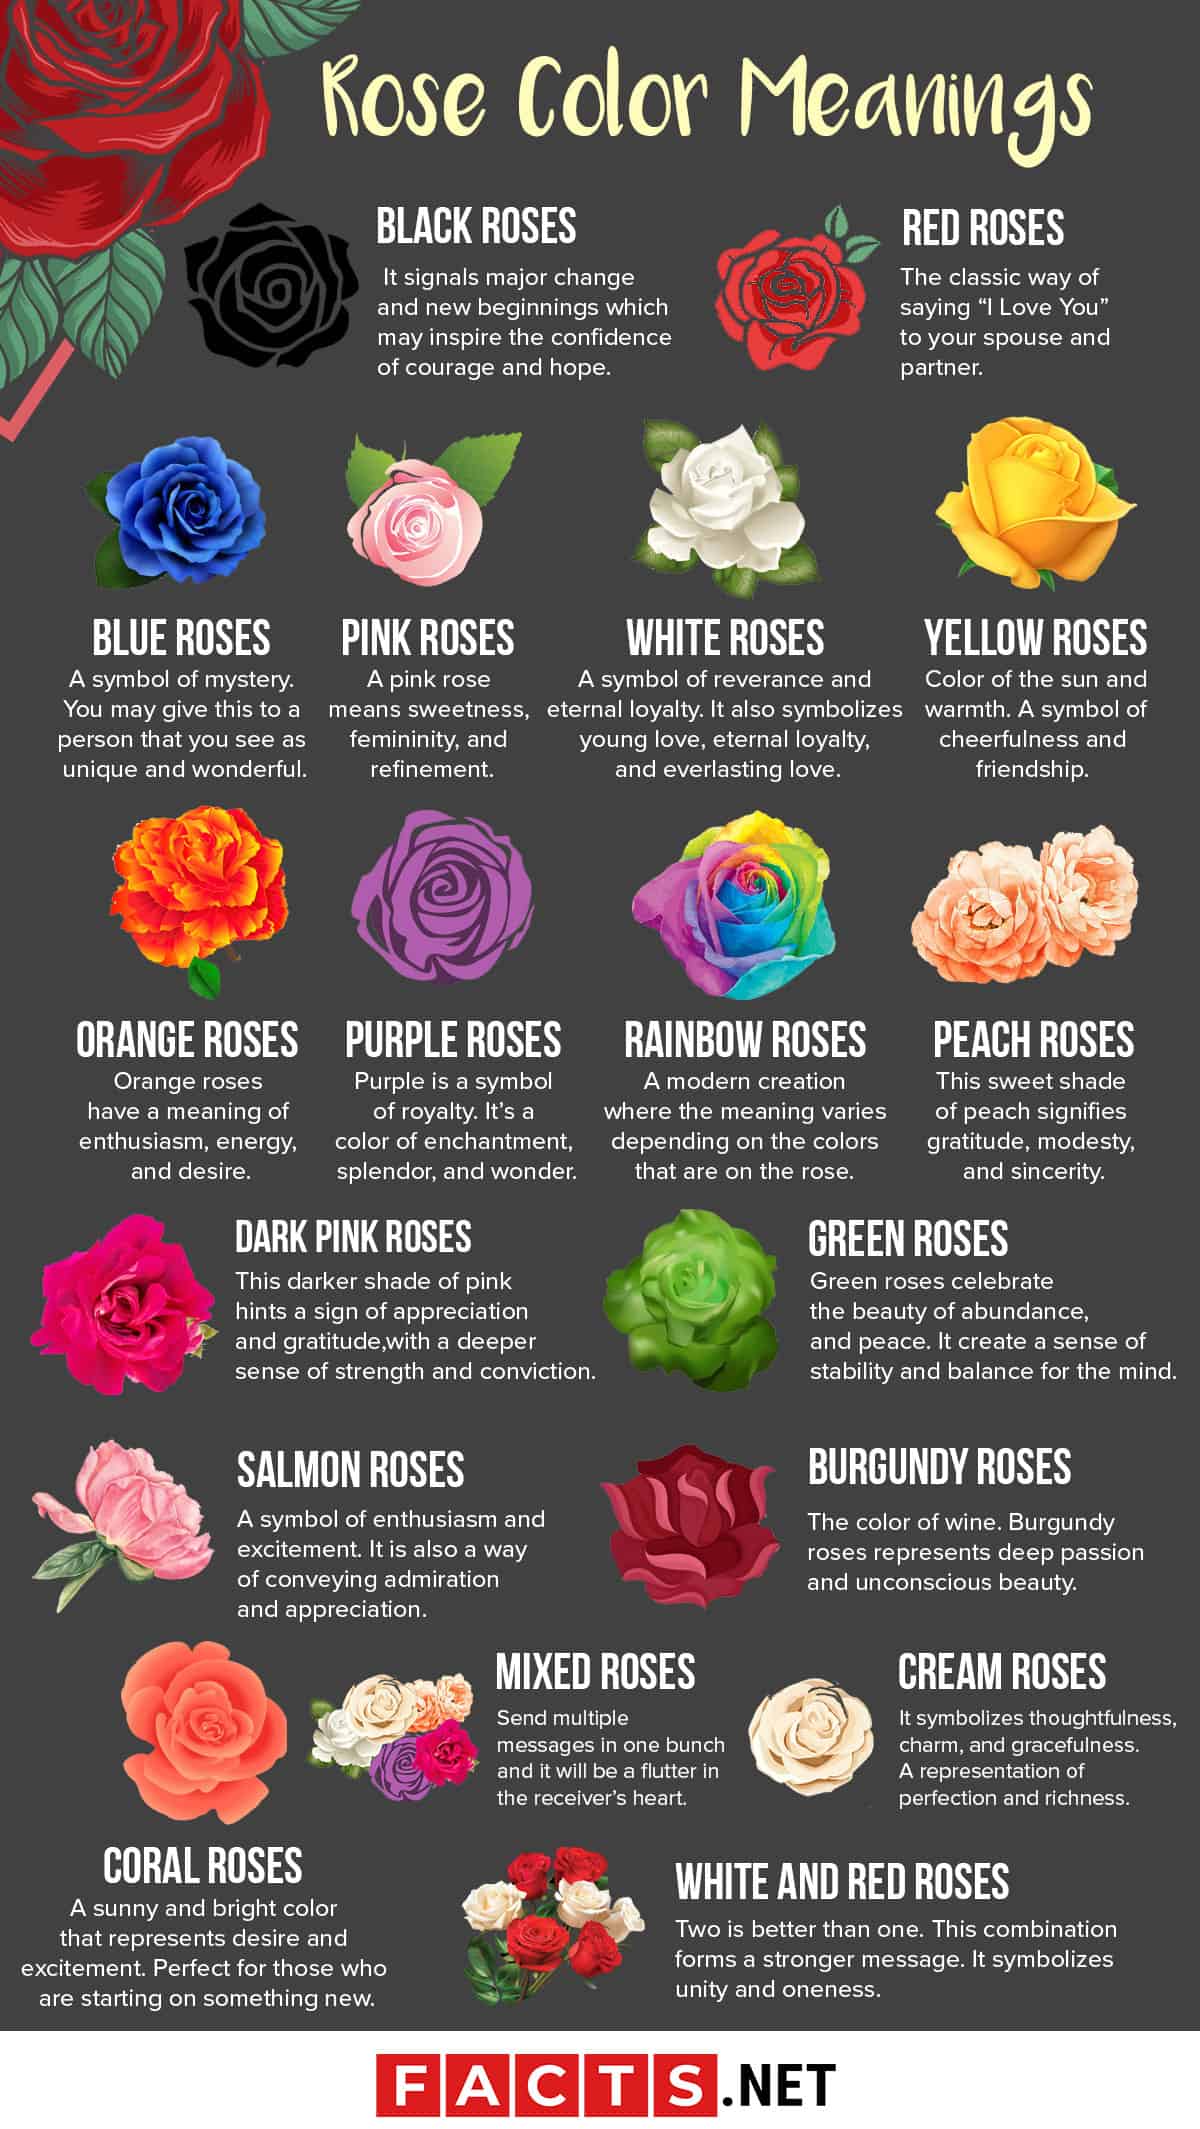 18-rose-color-meanings-that-are-just-more-than-romantic-facts